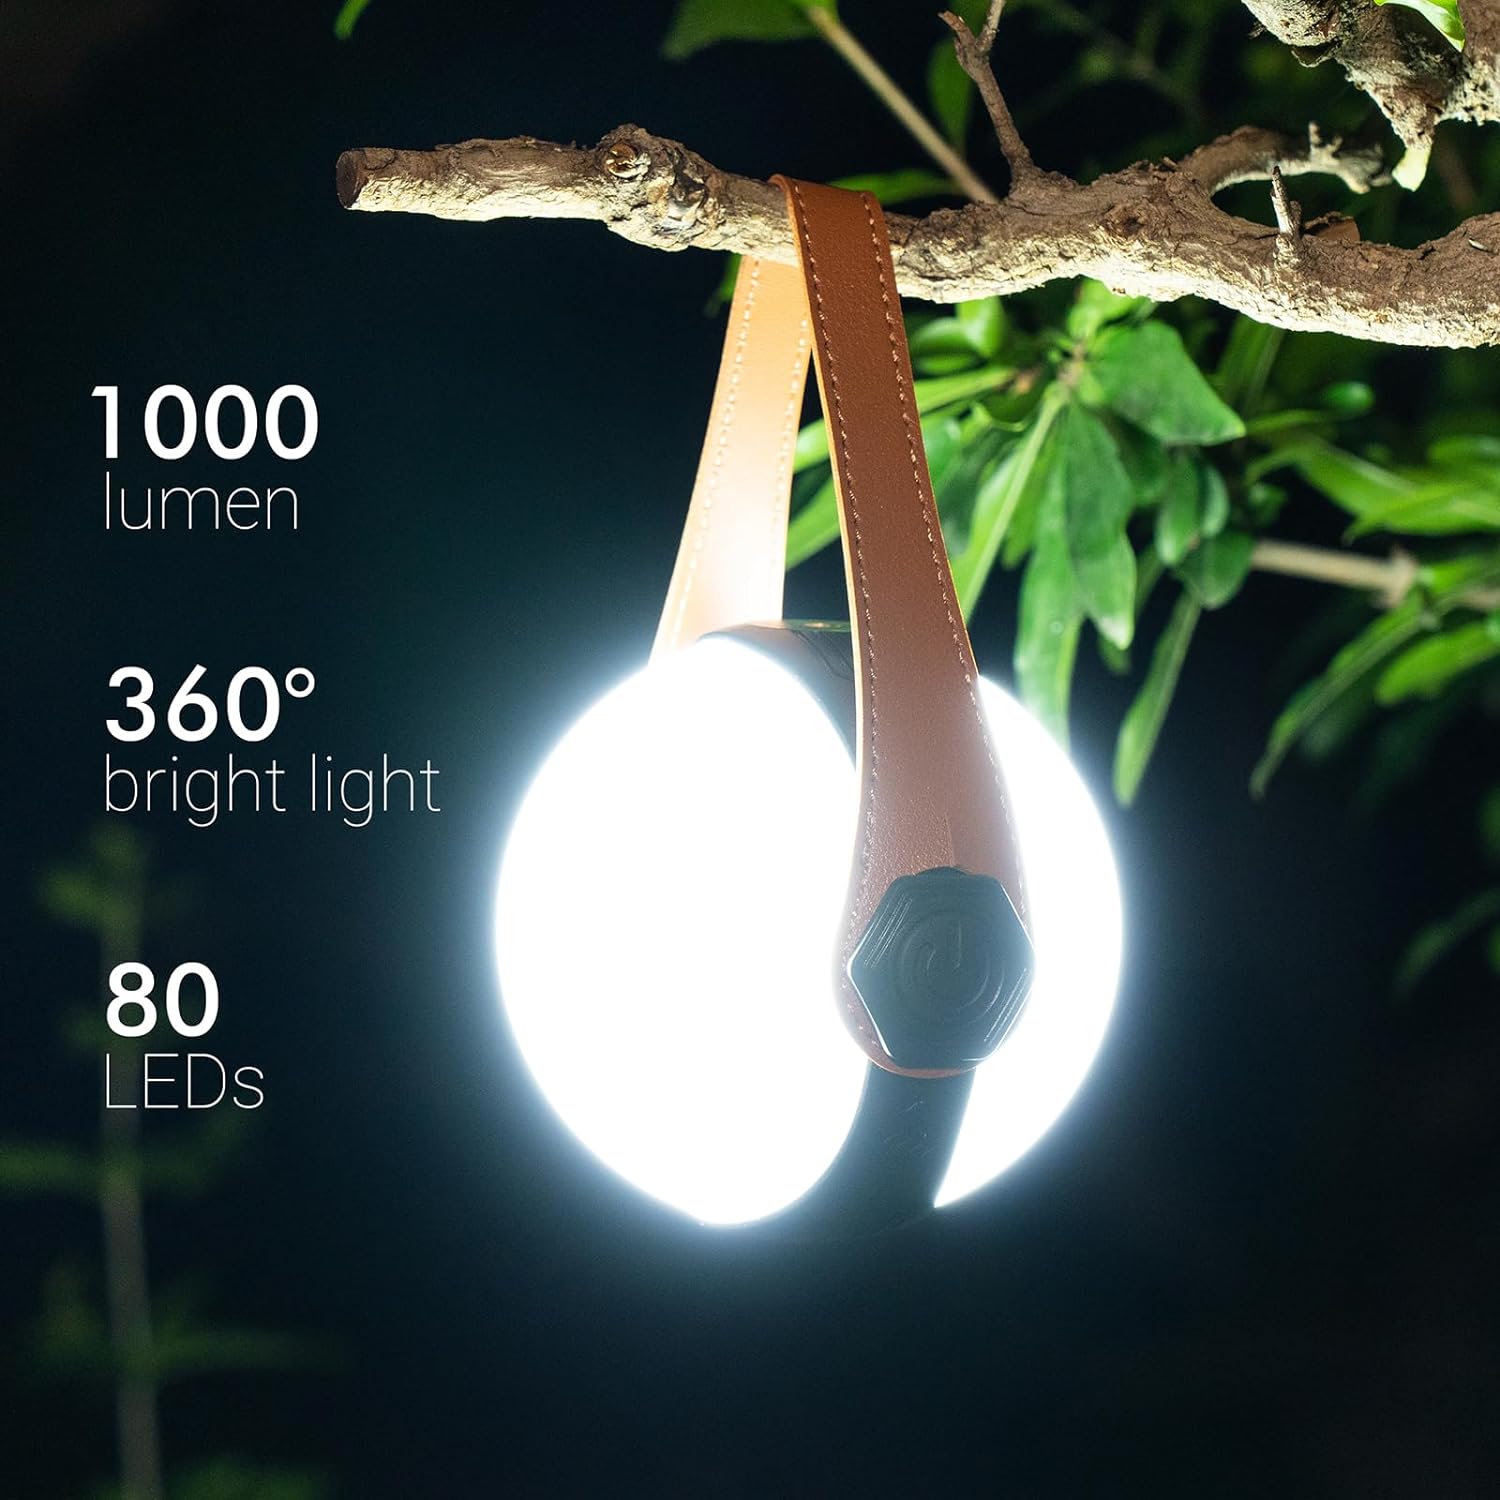 LED Camping Lantern Rechargeable 1000LM, Tent Lights for Camping Hanging with 7 Light Modes, Up to 6-48H Running Hours, IPX5 Waterproof 2400mAh Emergency Light for Power Outages, Hiking, Hurricane